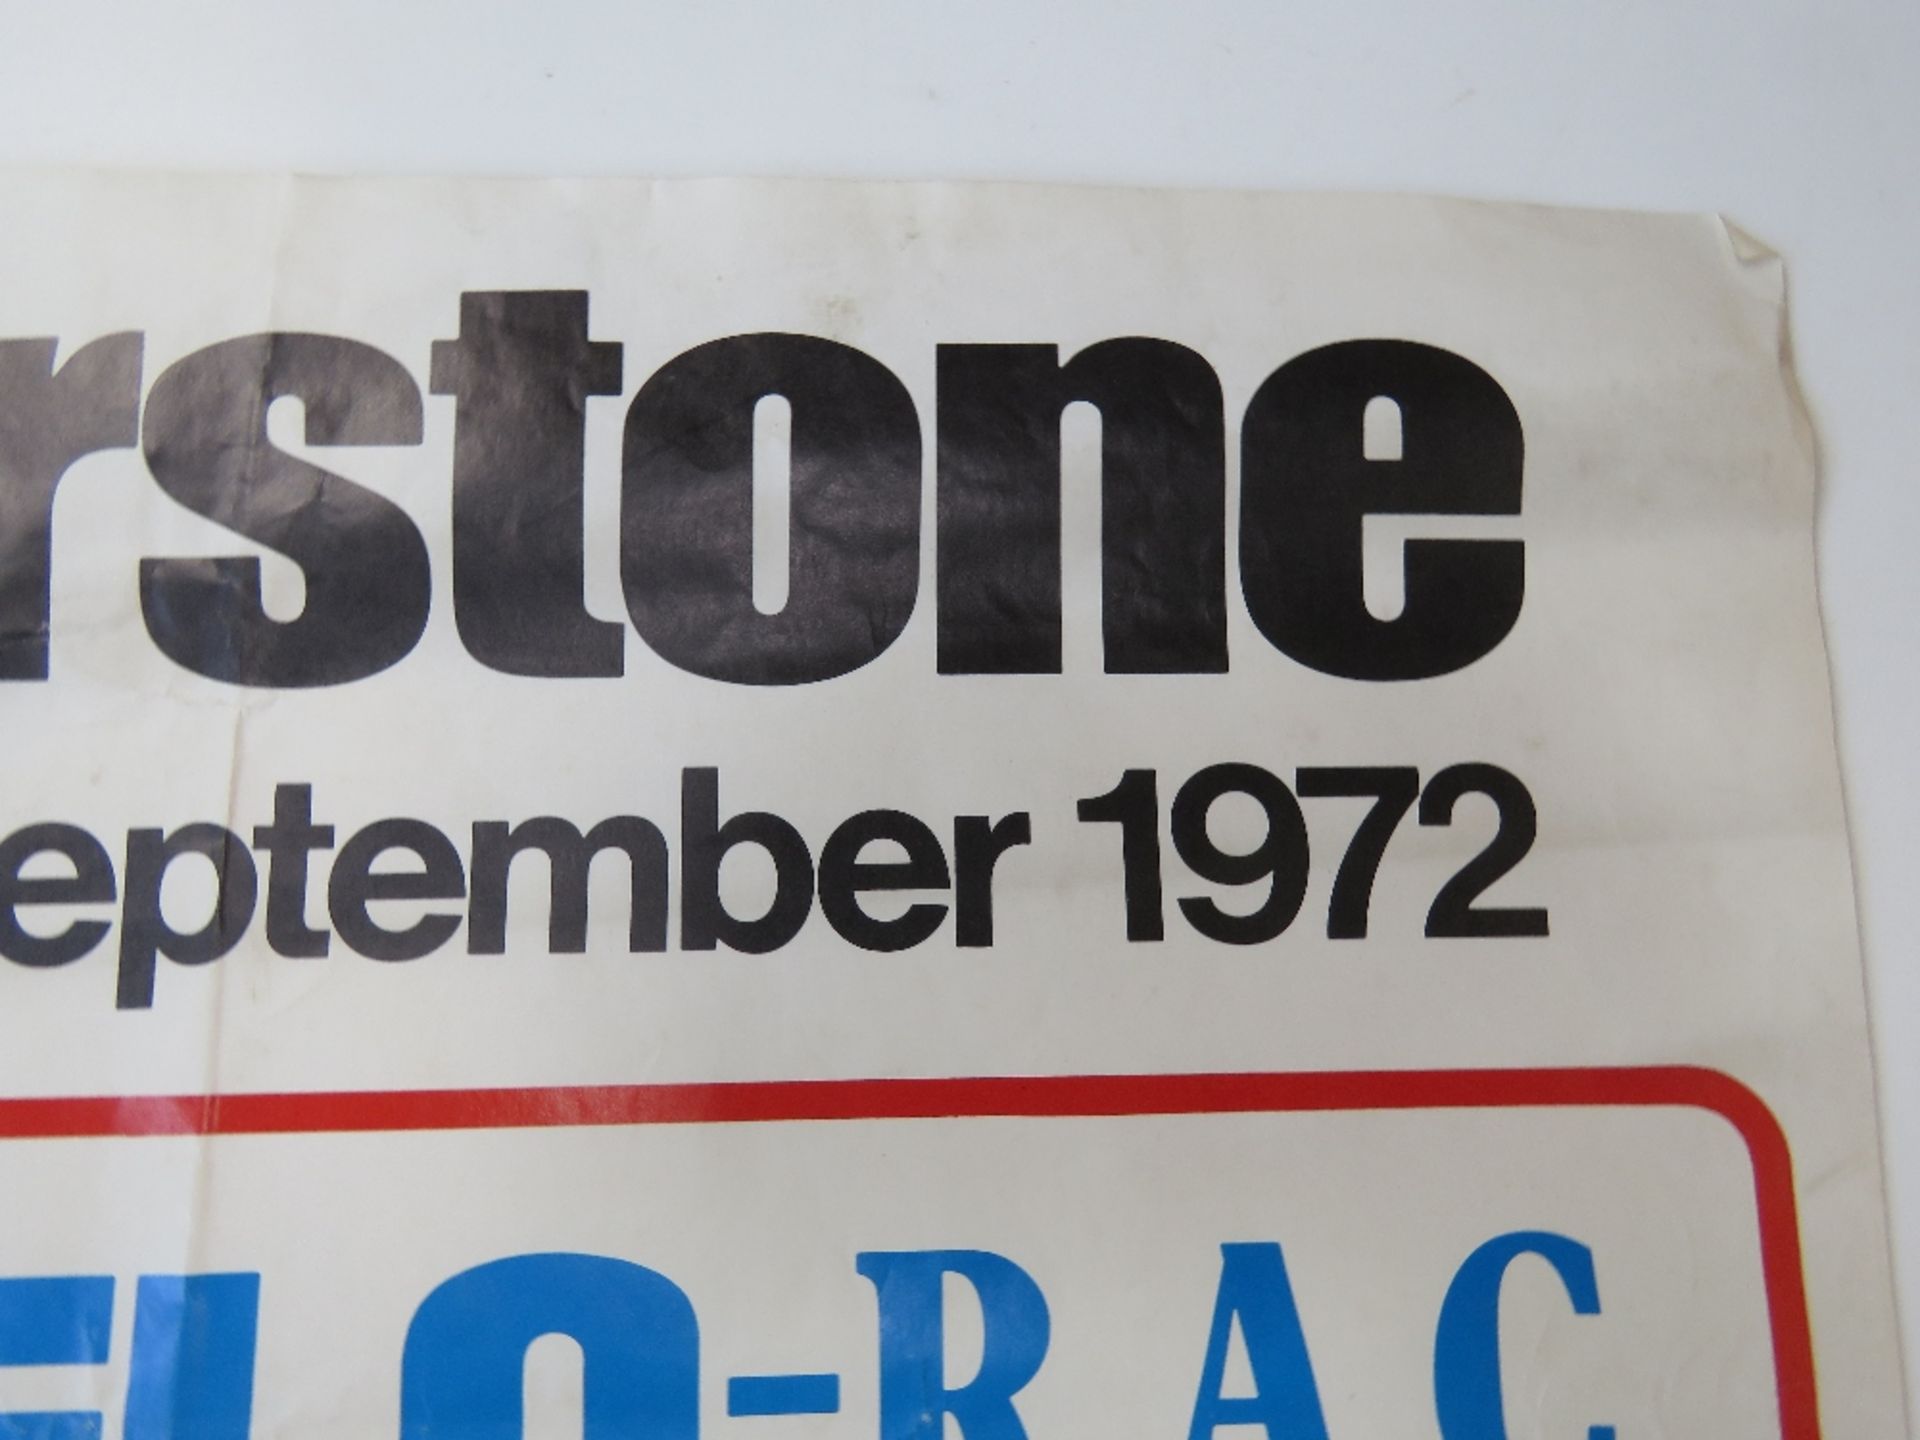 An original Silverstone 1972 poster for - Image 2 of 4